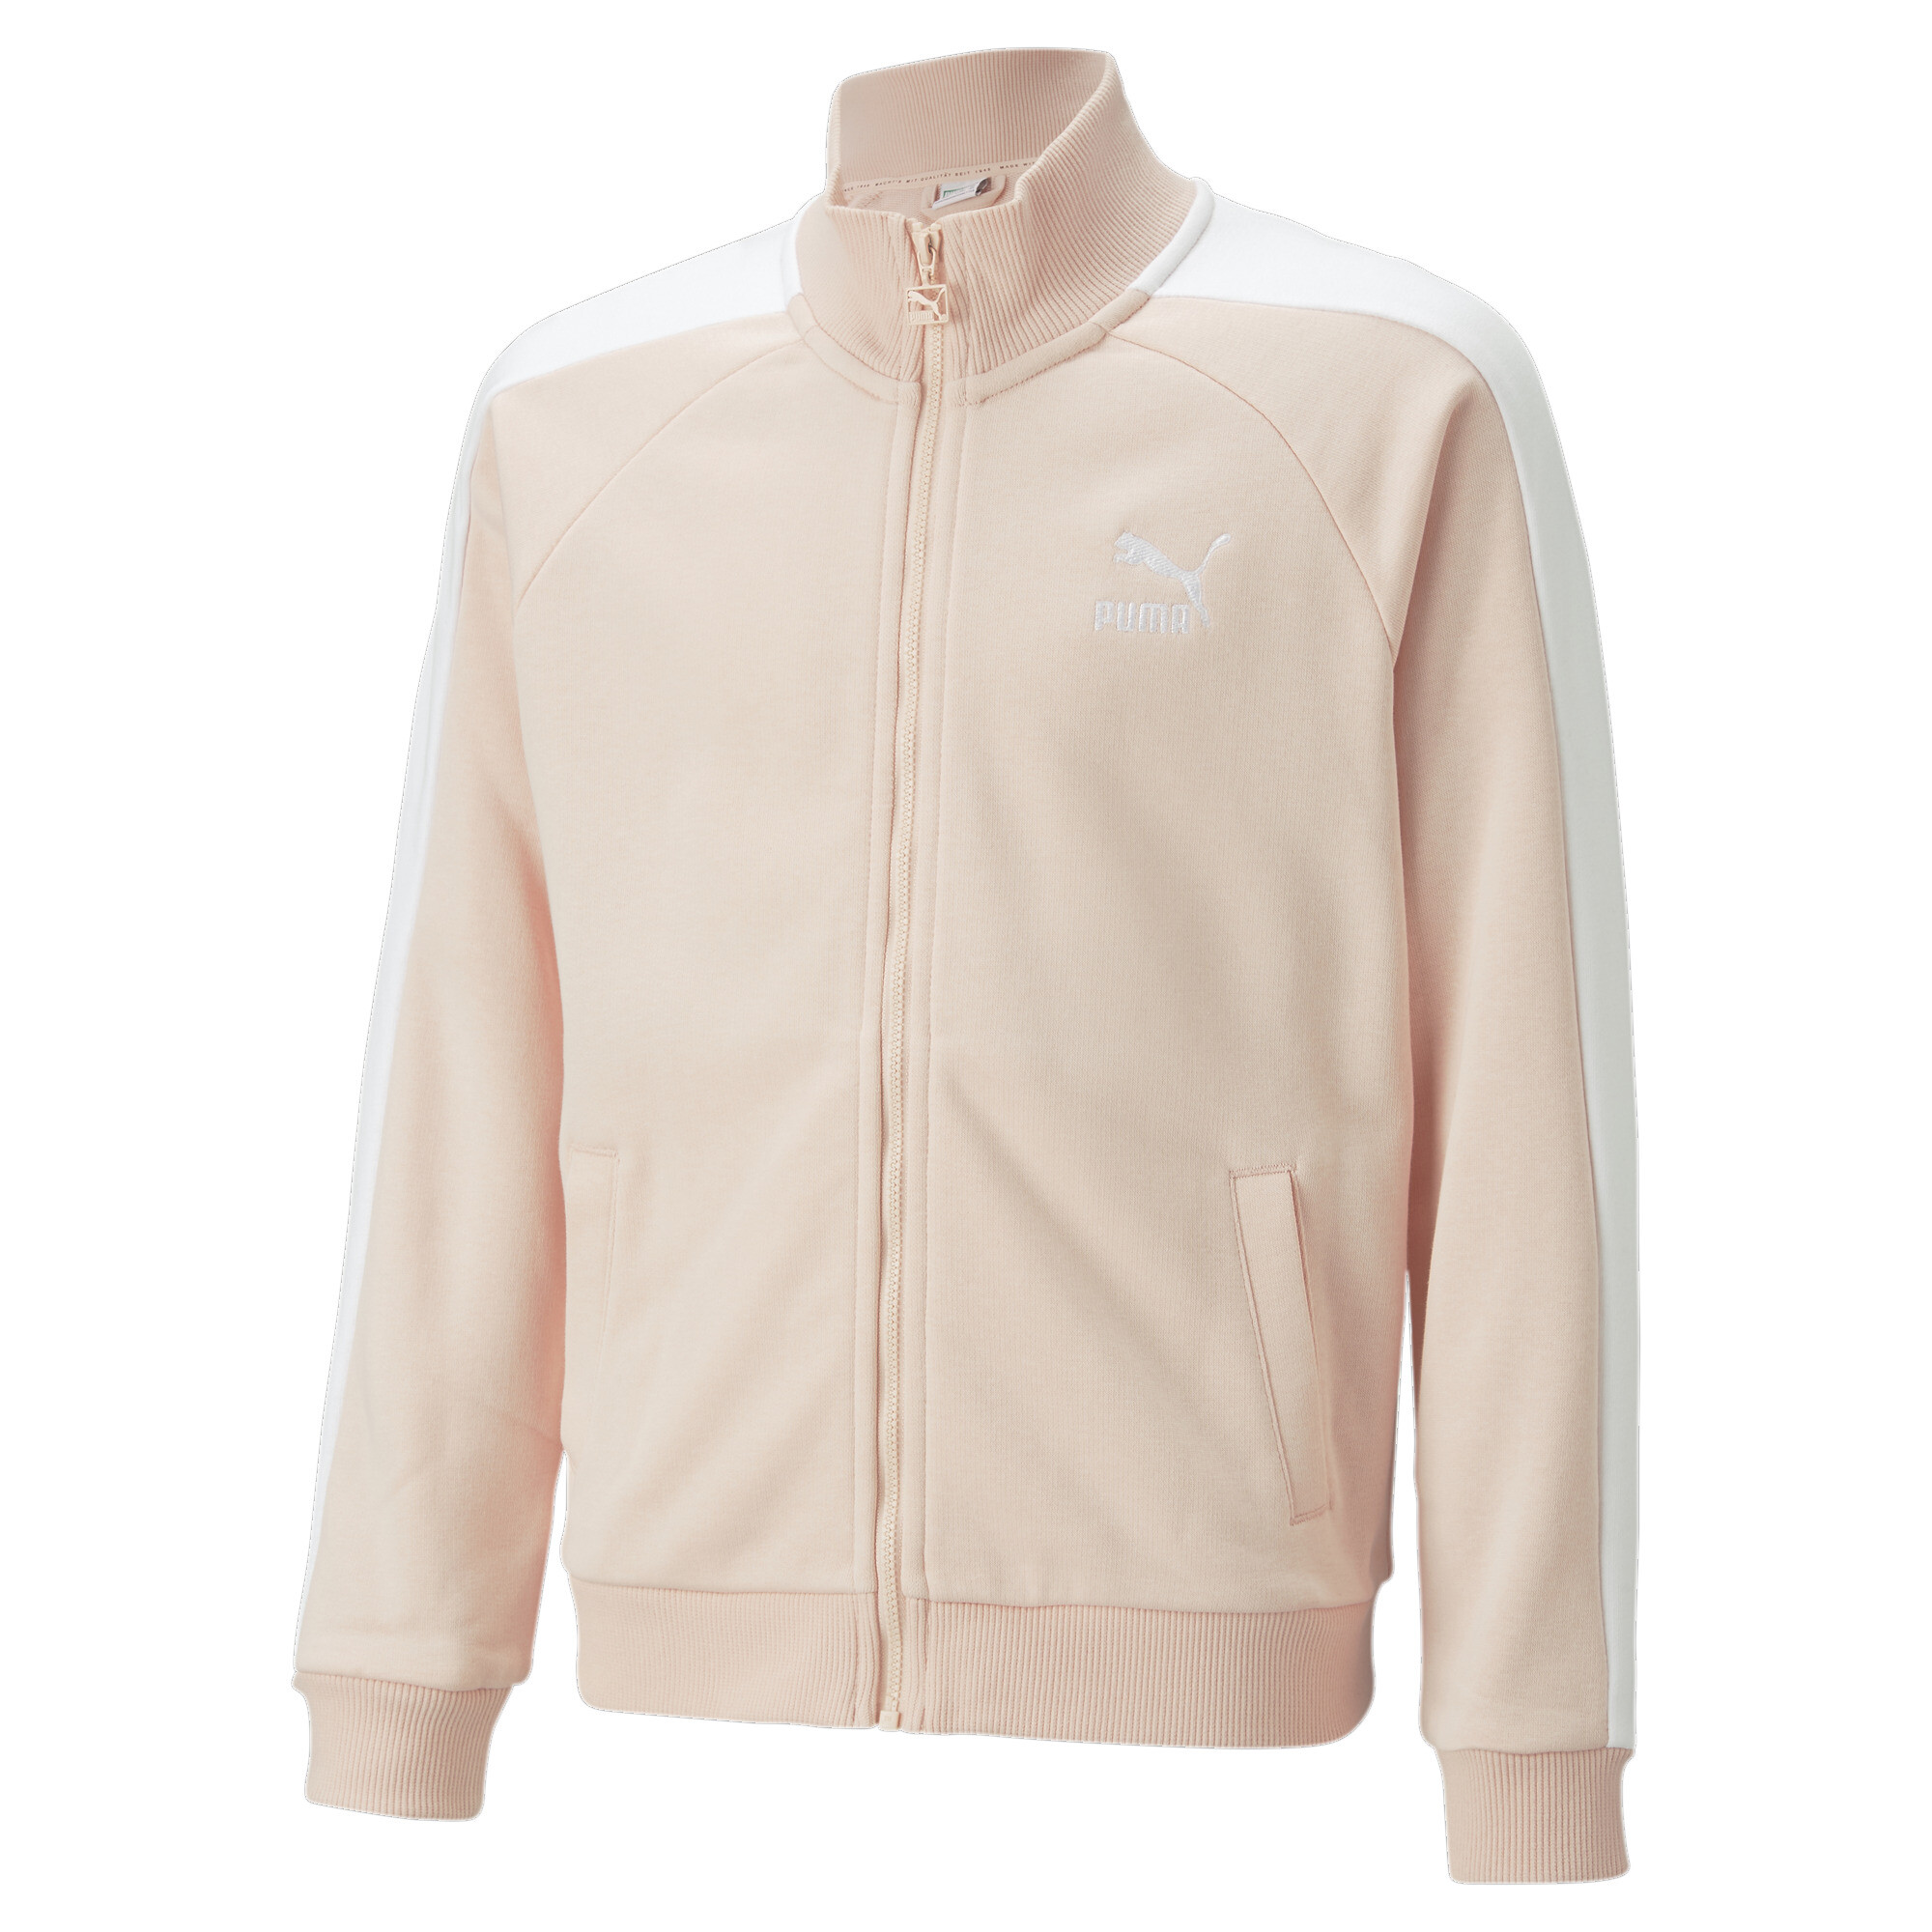 Puma Classics T7 Youth Track Jacket, Pink, Size 3-4Y, Clothing